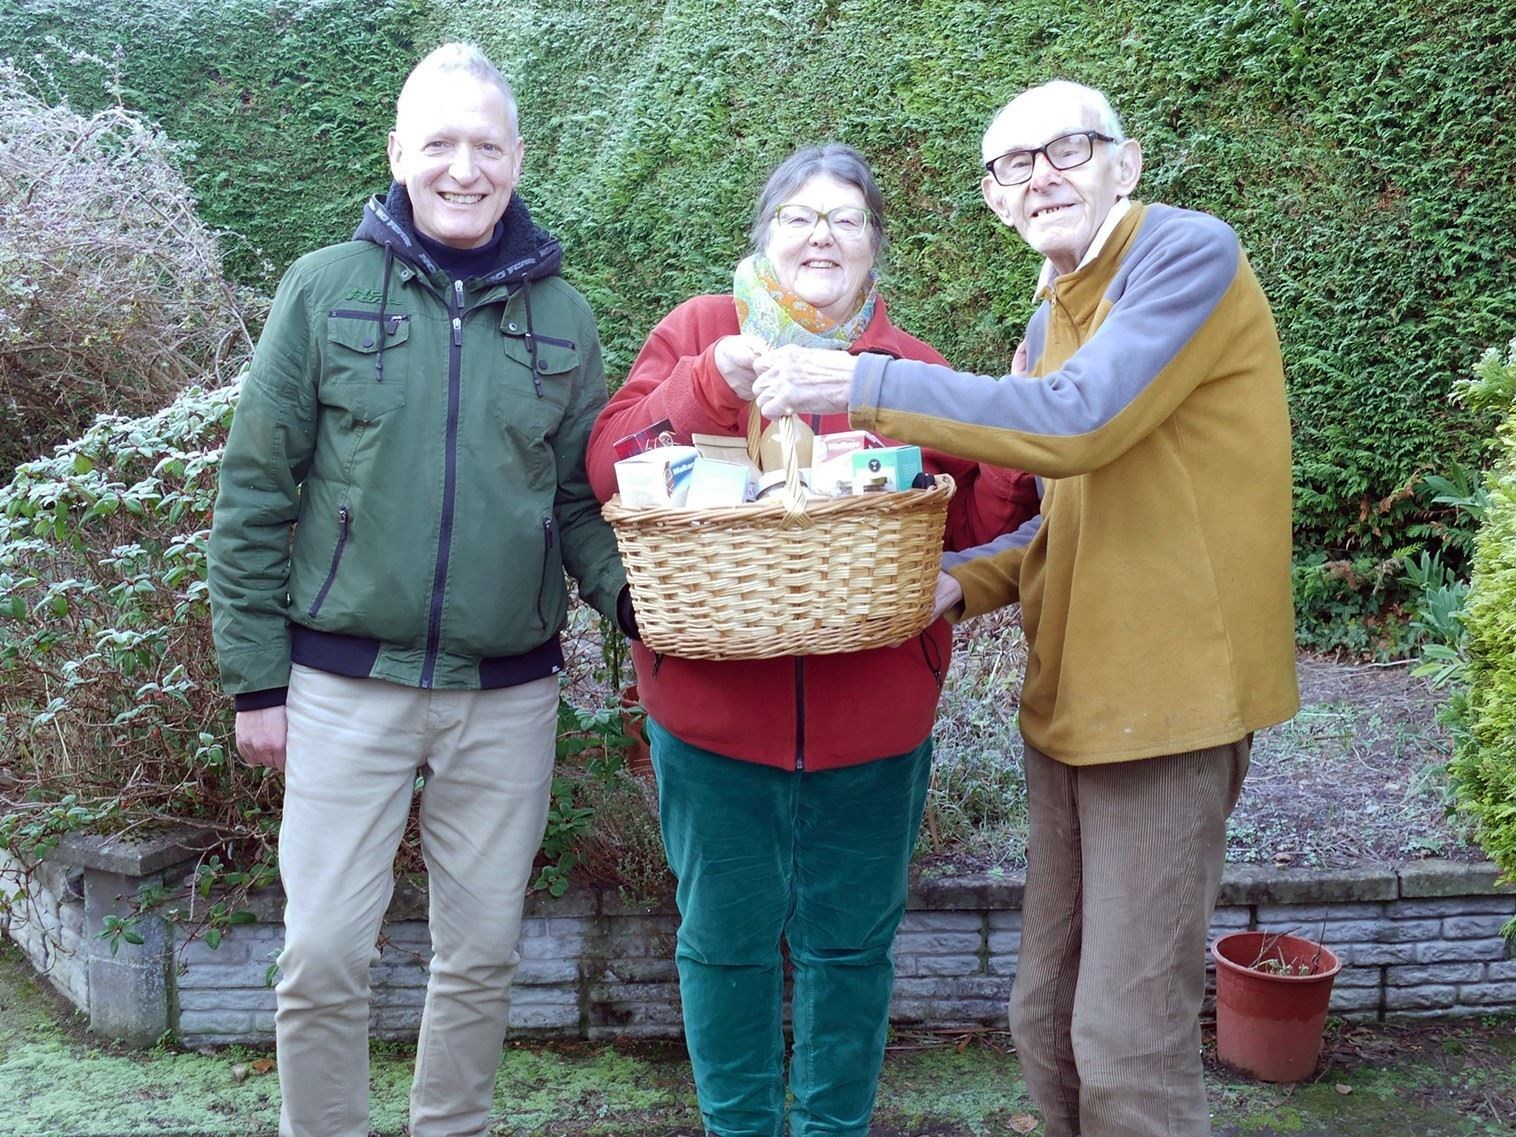 Stephen Coomber, Secretary of the Moray Way Association, and Kath Todd, chairwoman, and presenting Norman Thomson with a gift from the committee. Picture: Lise Olsen